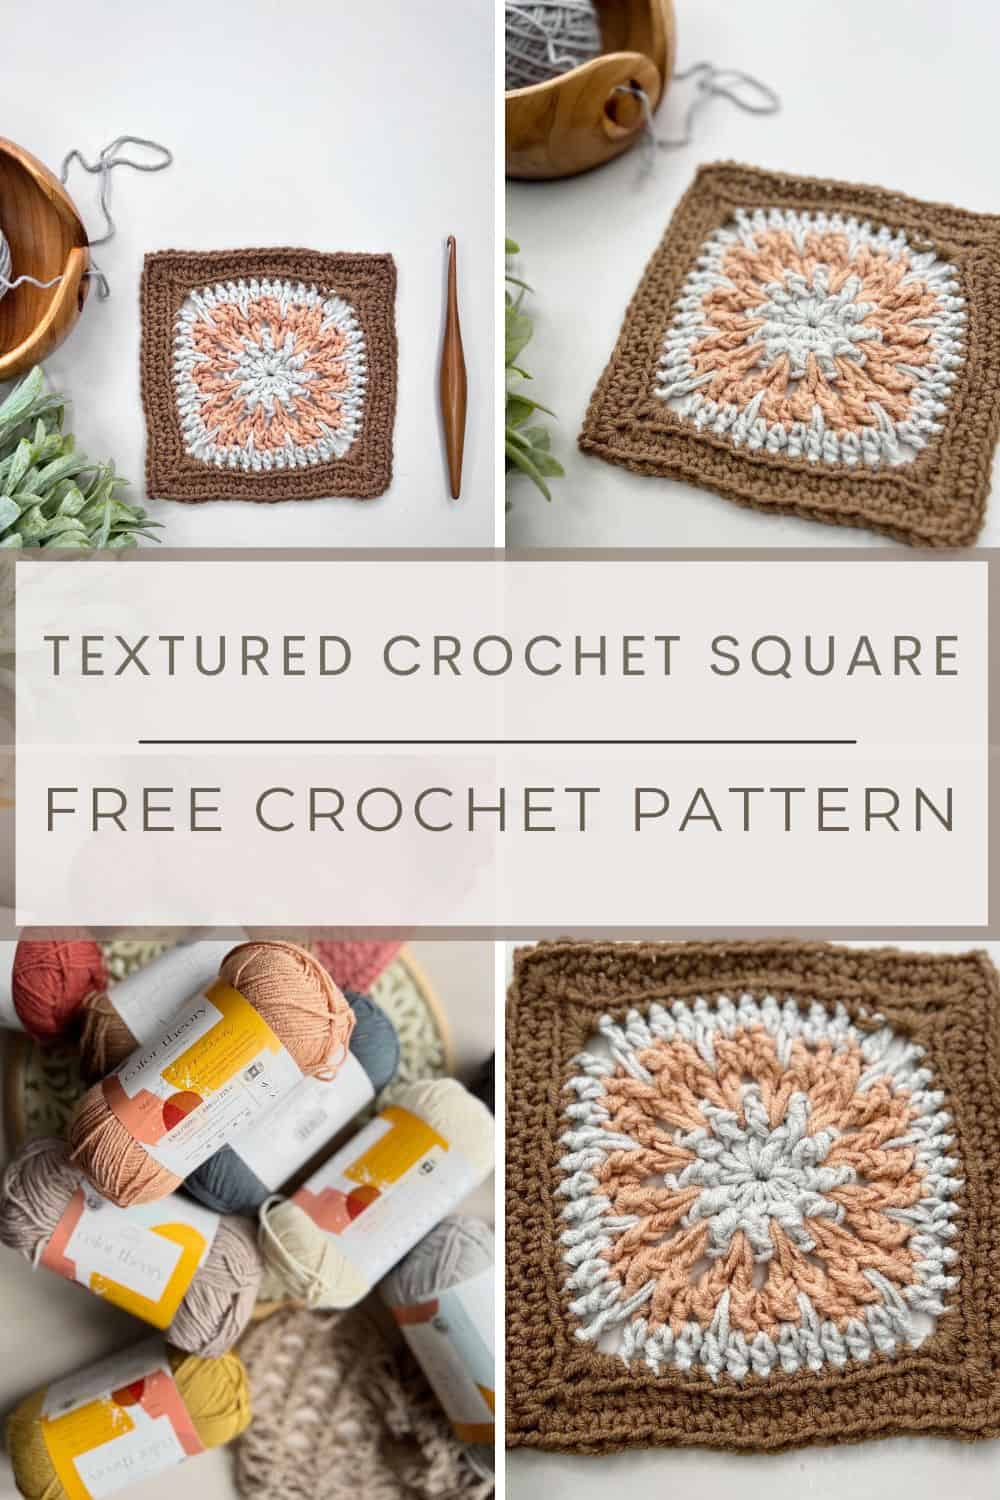 Textured Crochet Square Pattern shown in four different images with yarn and crochet hook.